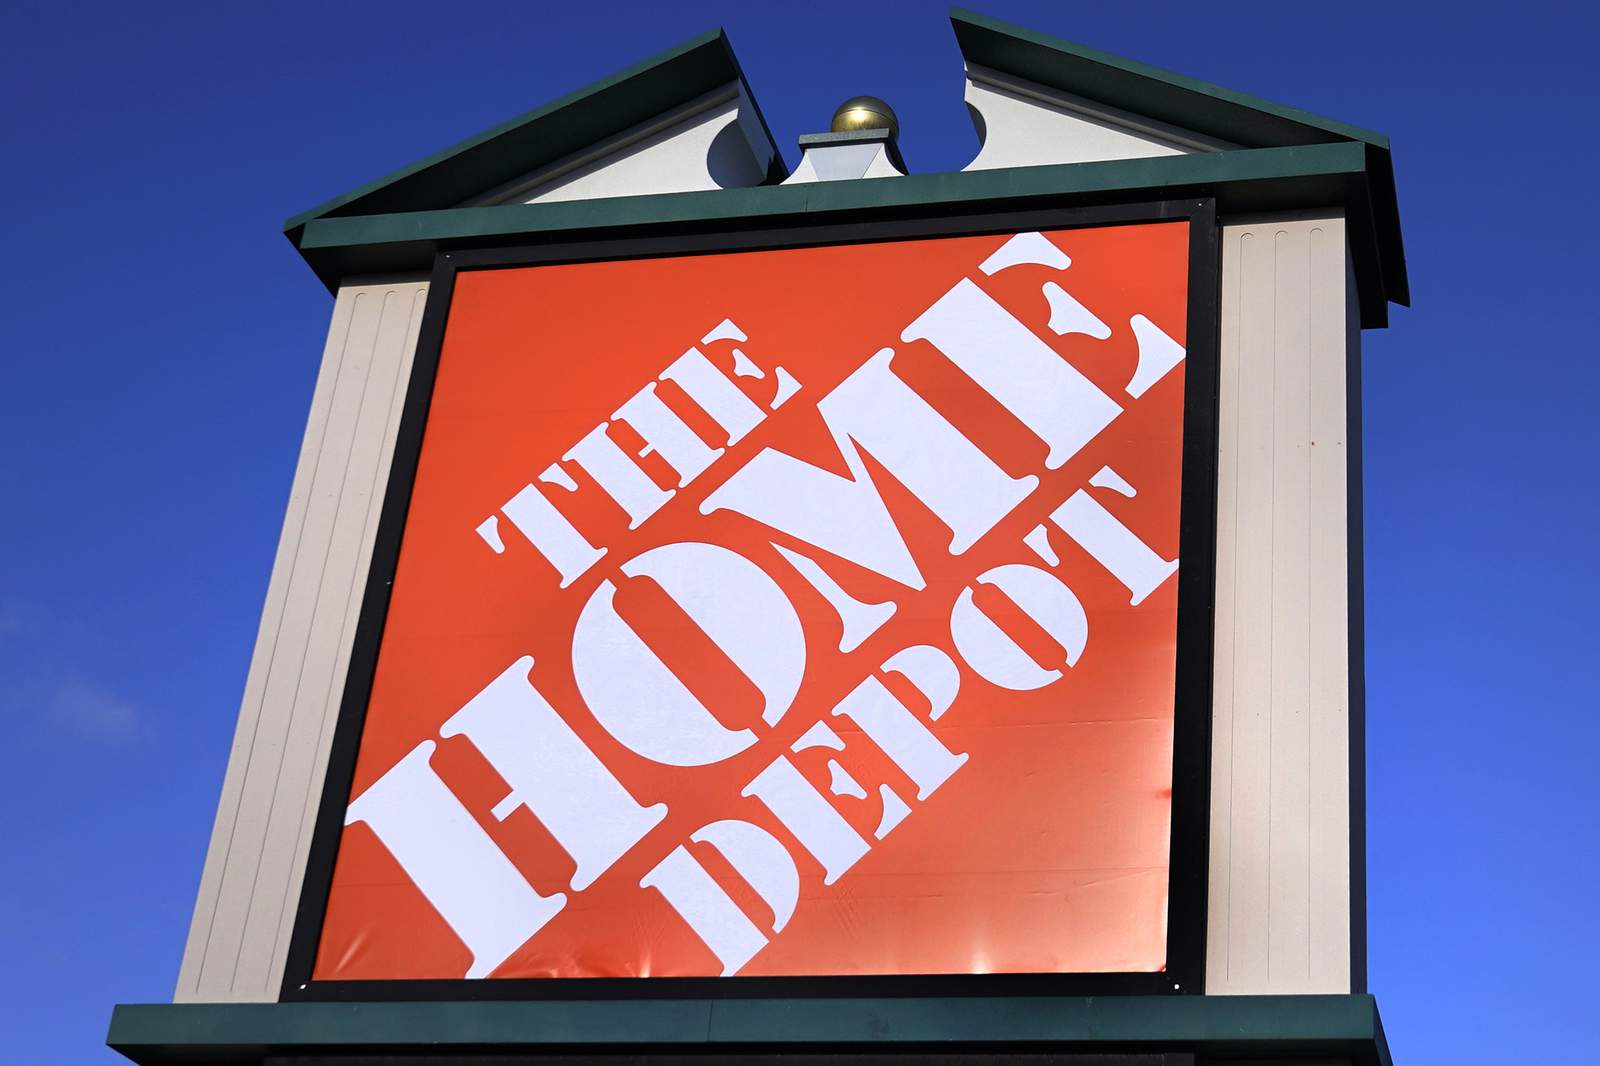 Home Depot agrees to $17.5m settlement in 2014 data breach